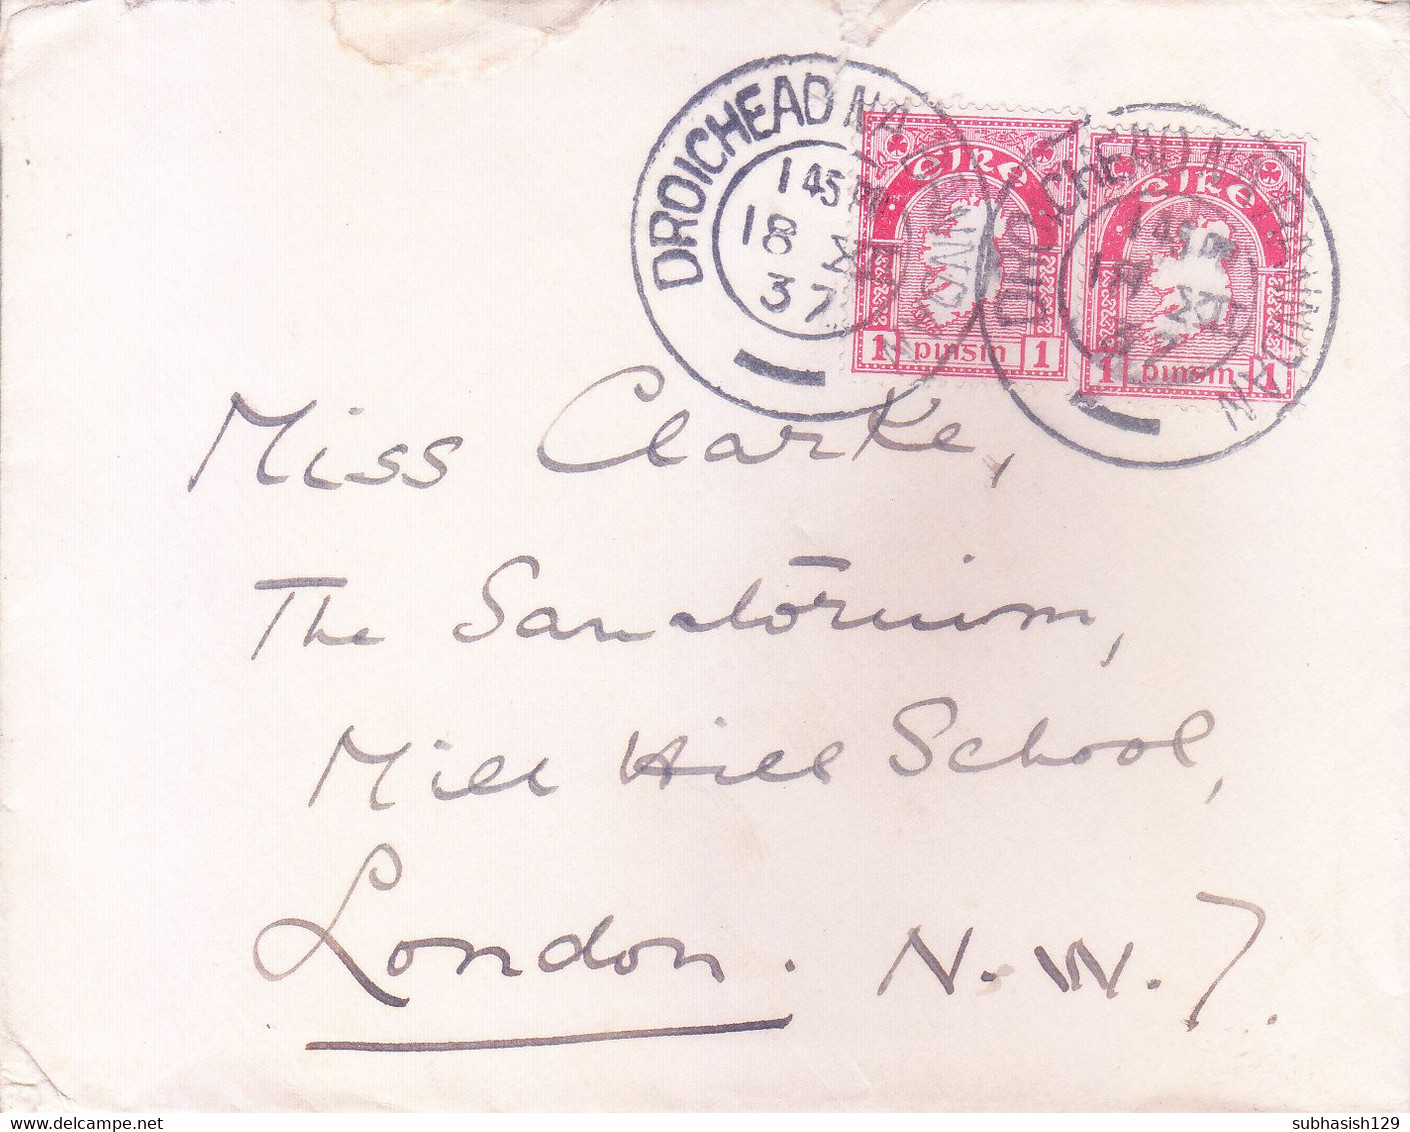 IRELAND : ENTIRE : YEAR 1937 : COVER POSTED FROM DROICHEAD NA RANNDAN FOR LONDON : USE OF 2v 1 PINSIN STAMPS - Brieven En Documenten